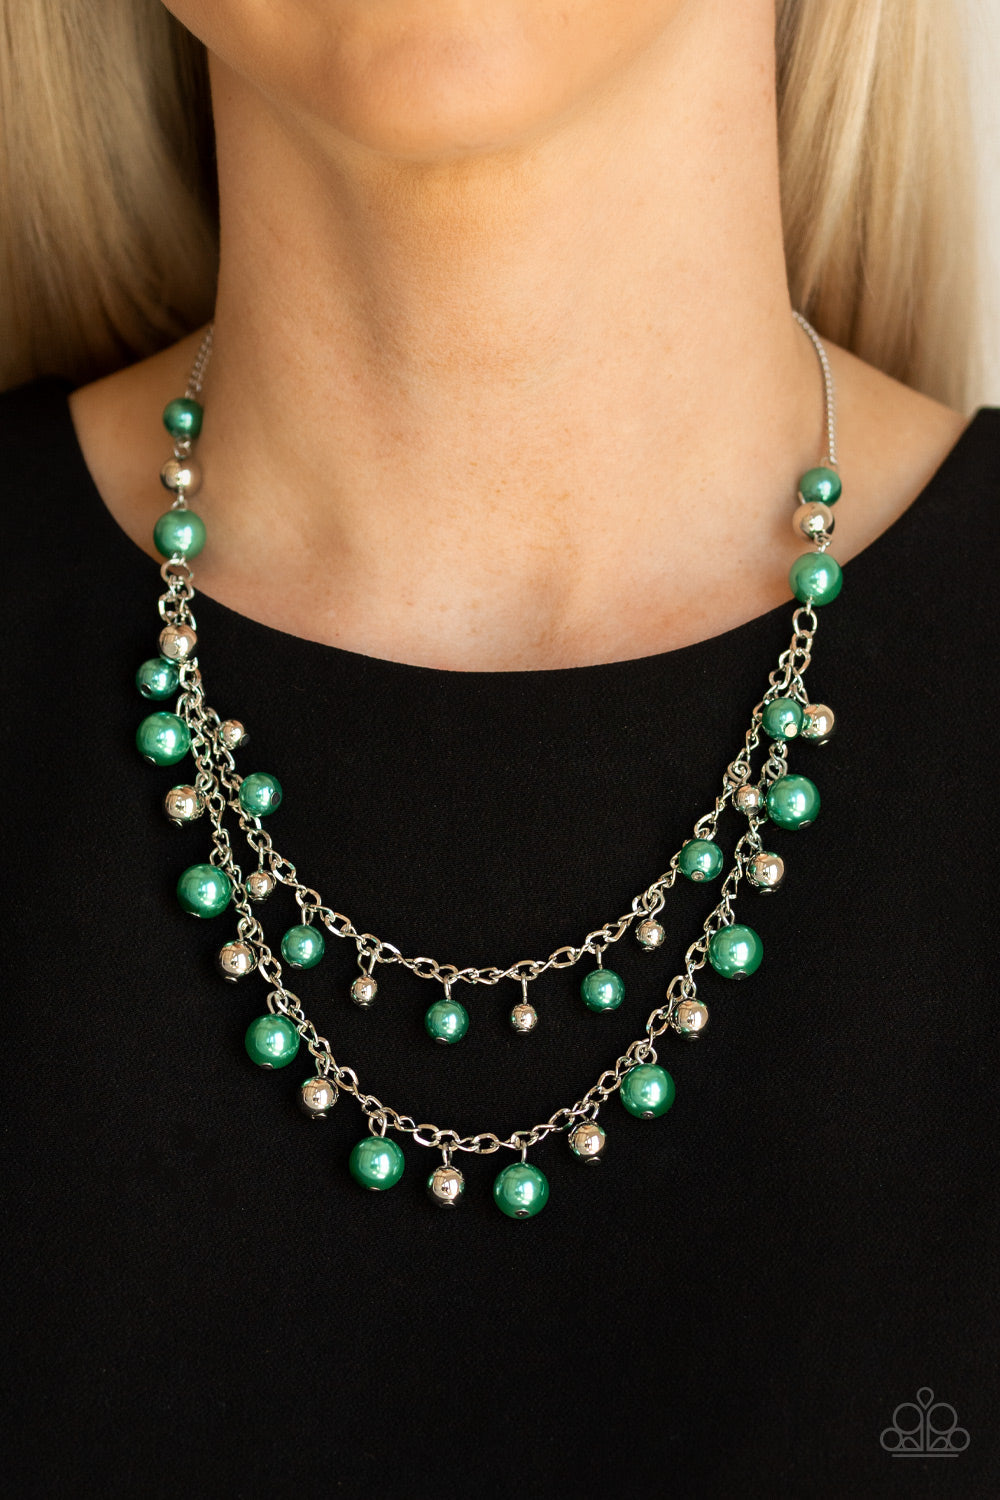 Fantastic Flair - Green and Silver Necklace - Paparazzi Accessories - A refined collection of glistening silver and pearly green beads swing from the bottom of shimmery silver chains, creating glamorous layers below the collar. Features an adjustable clasp closure. 